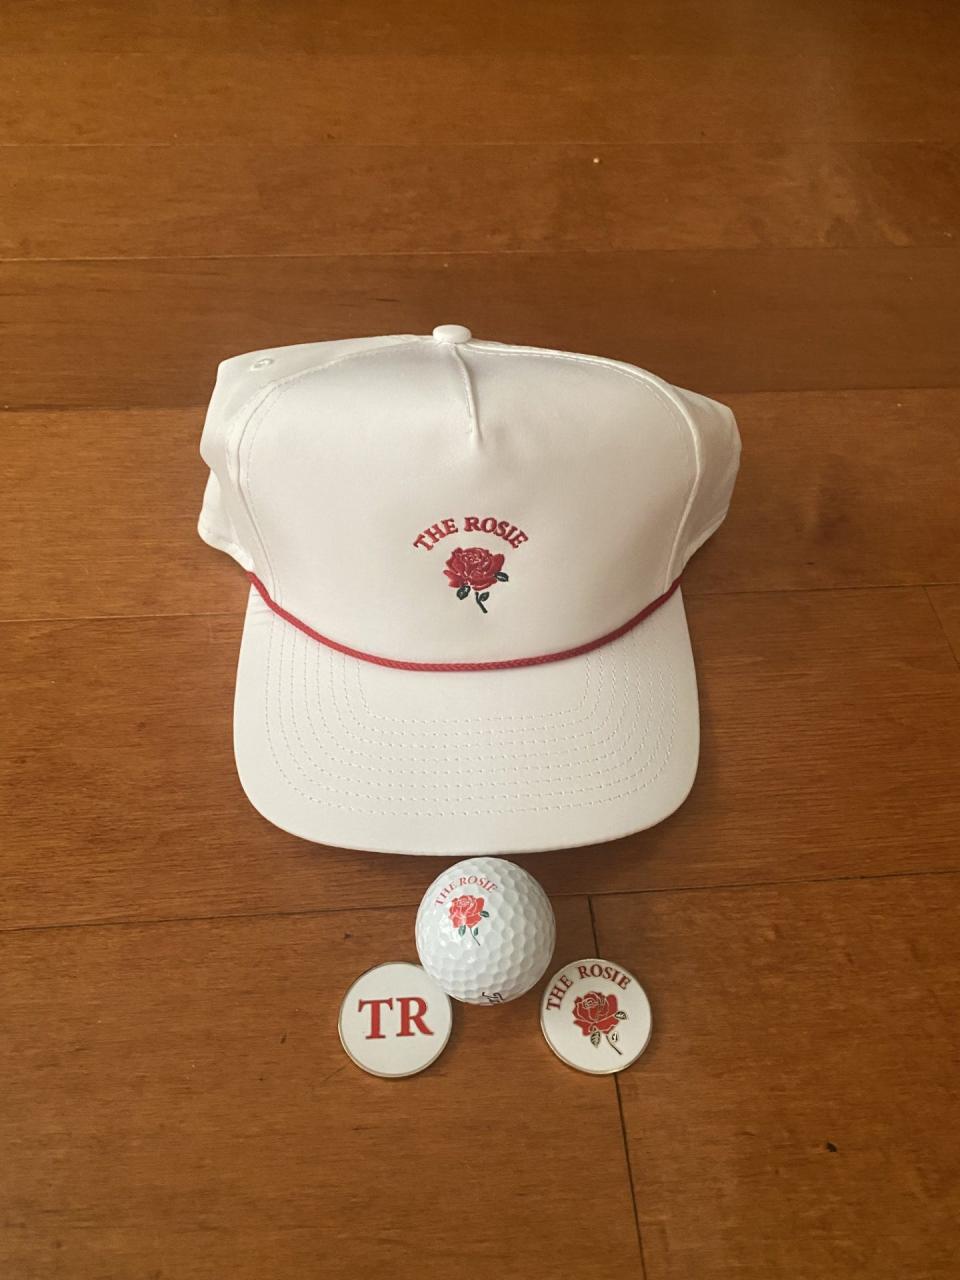 Inaugural The Rosie was held Monday at the Floridian Golf Club. Here are the hats, balls and markers used by the participants.